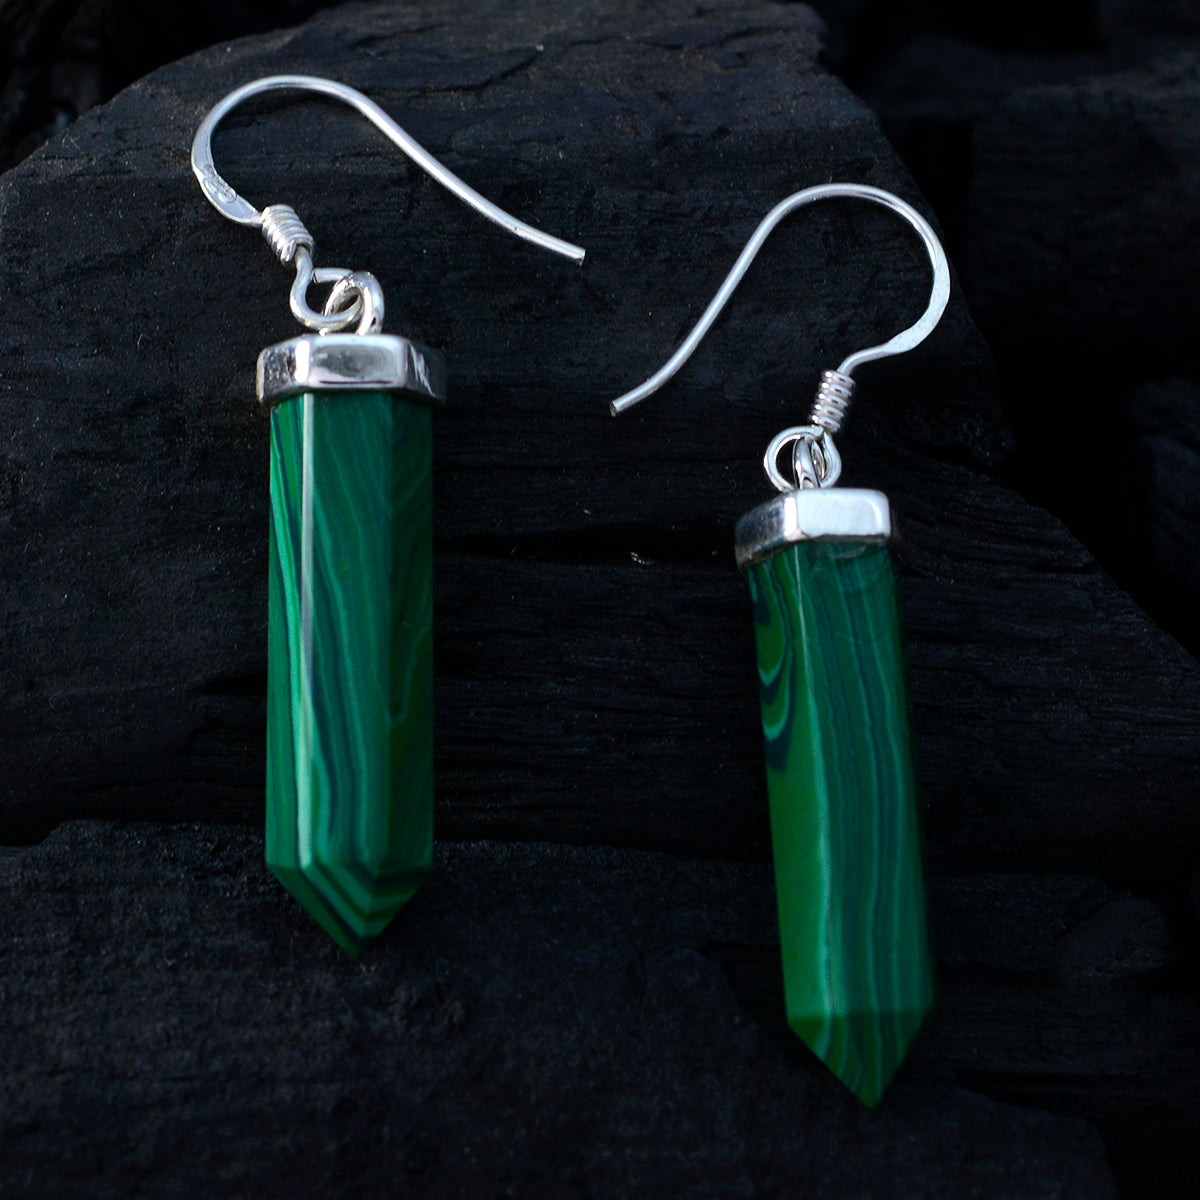 Riyo Real Gemstones fancy Faceted Green Malachatie Silver Earrings gift for st. patricks day